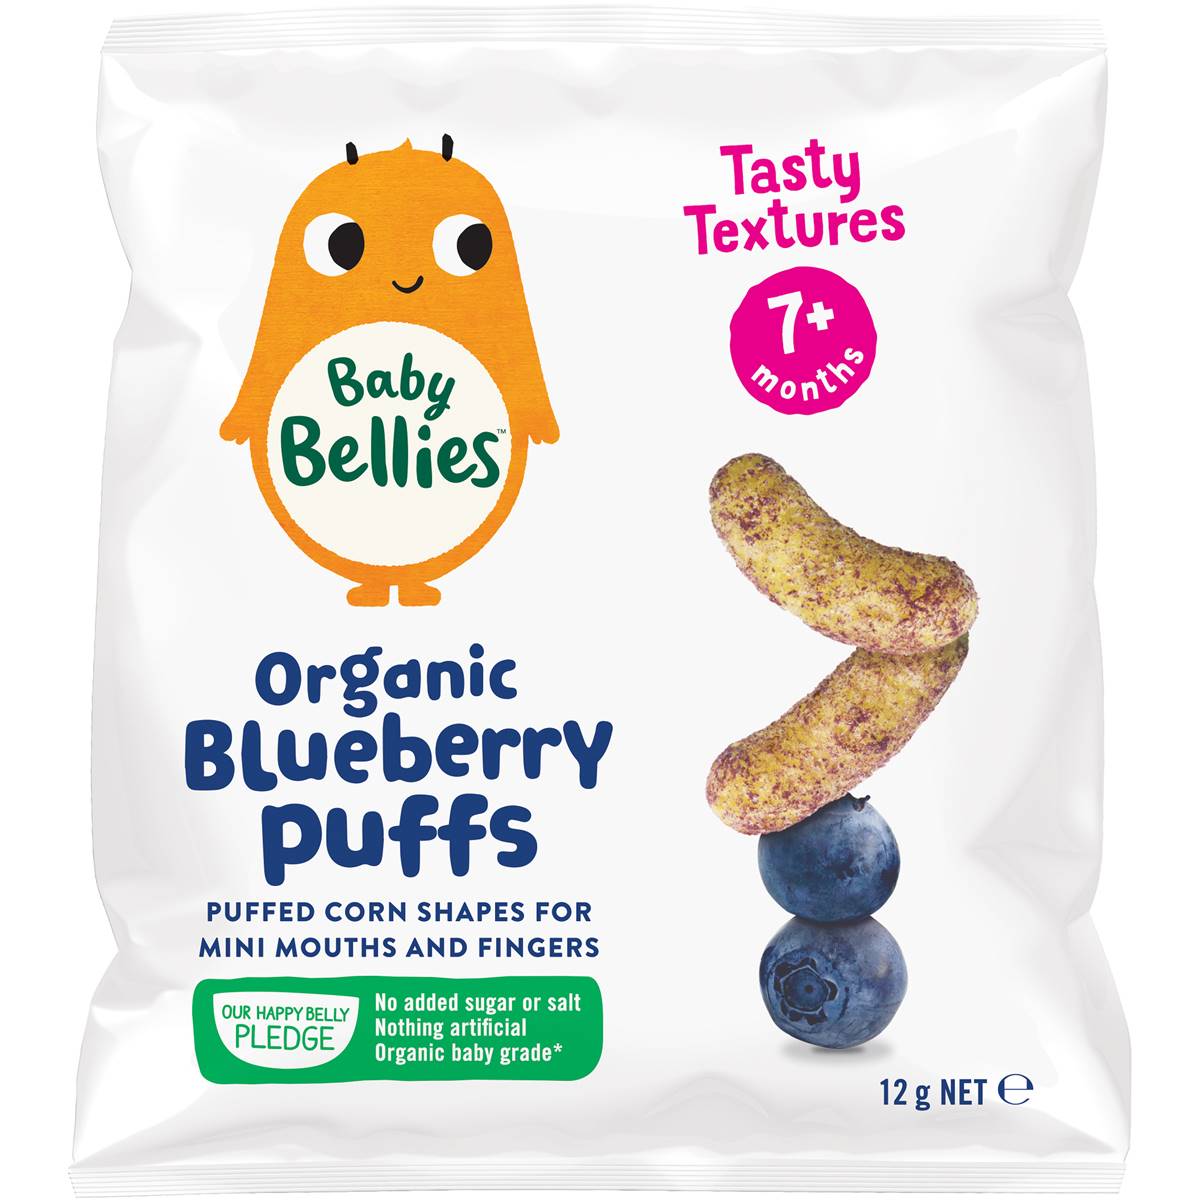 Calories in Baby Bellies Organic Puffs Blueberry